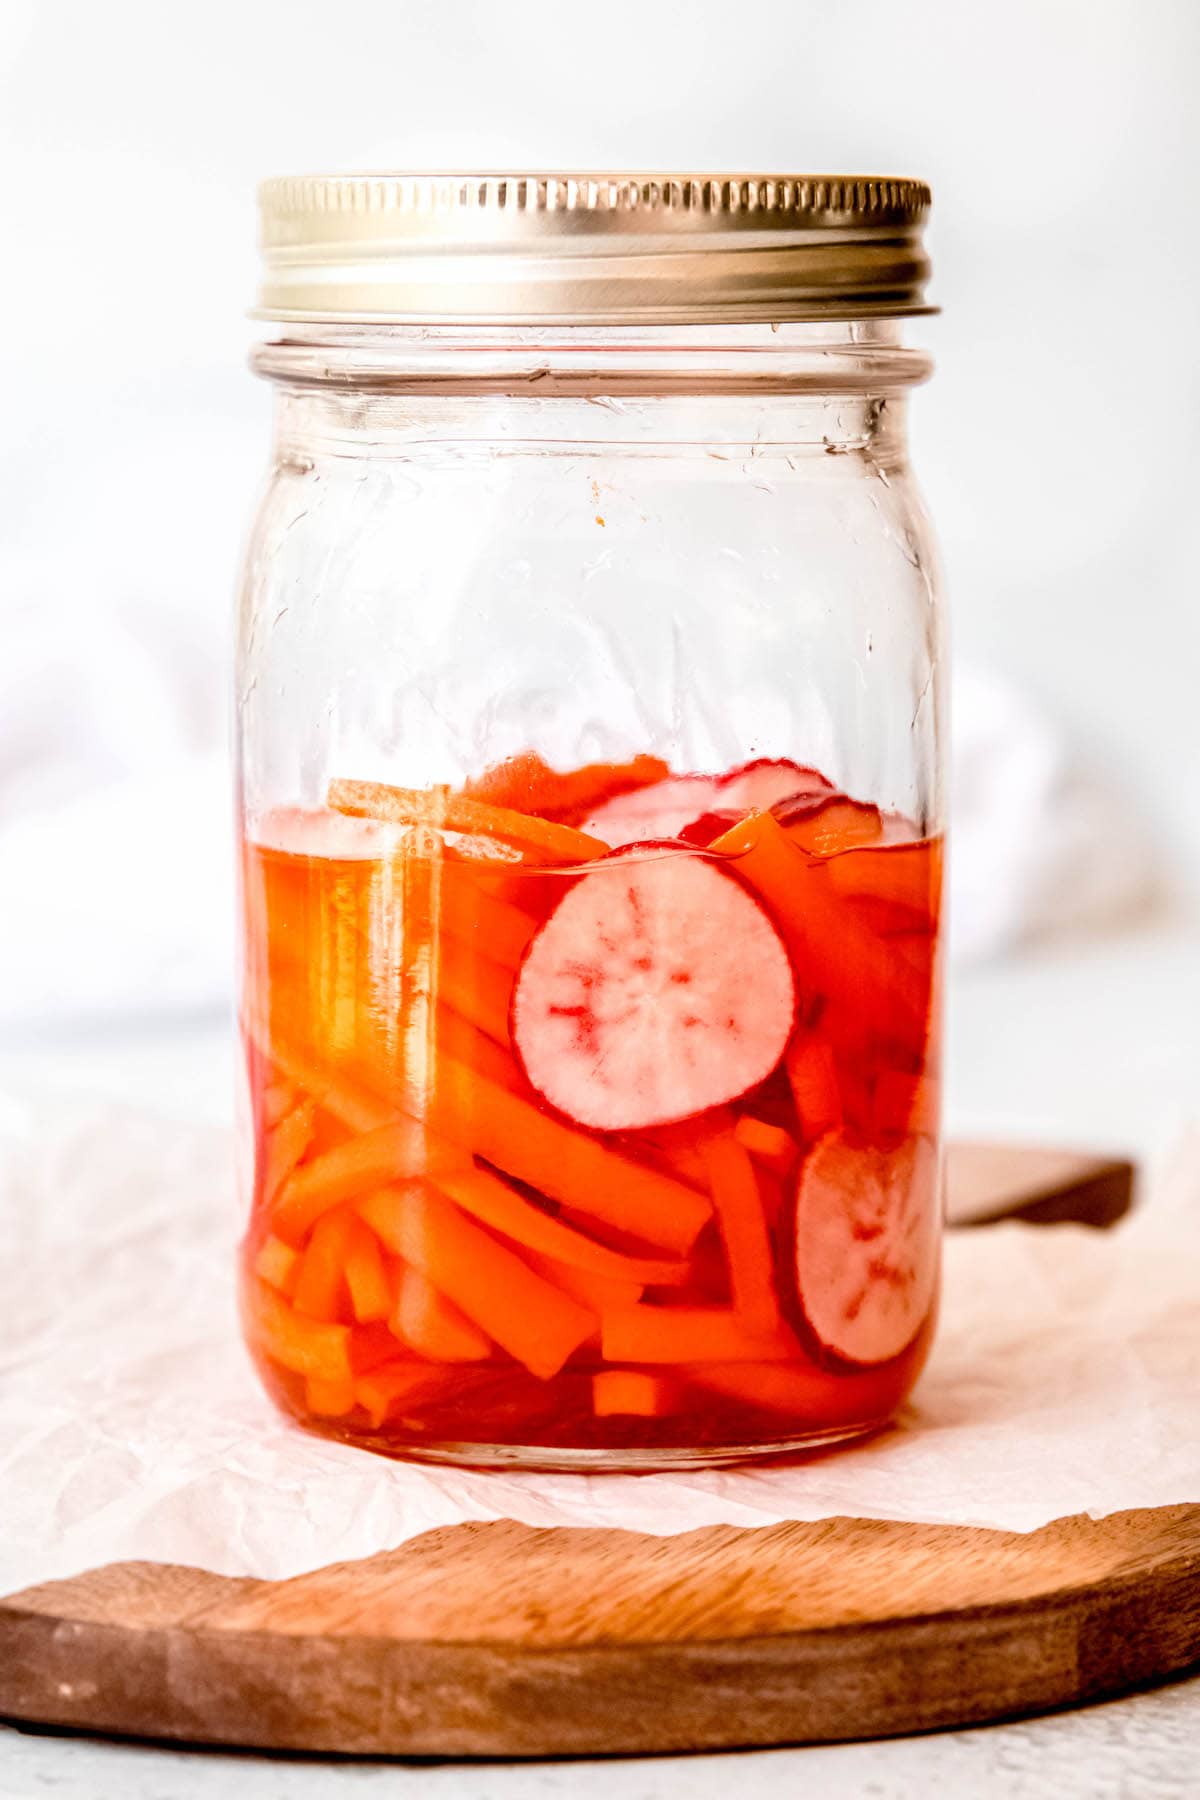 julienned carrots and thinly sliced radishes in a mason jar with banh mi-style pickling juice.